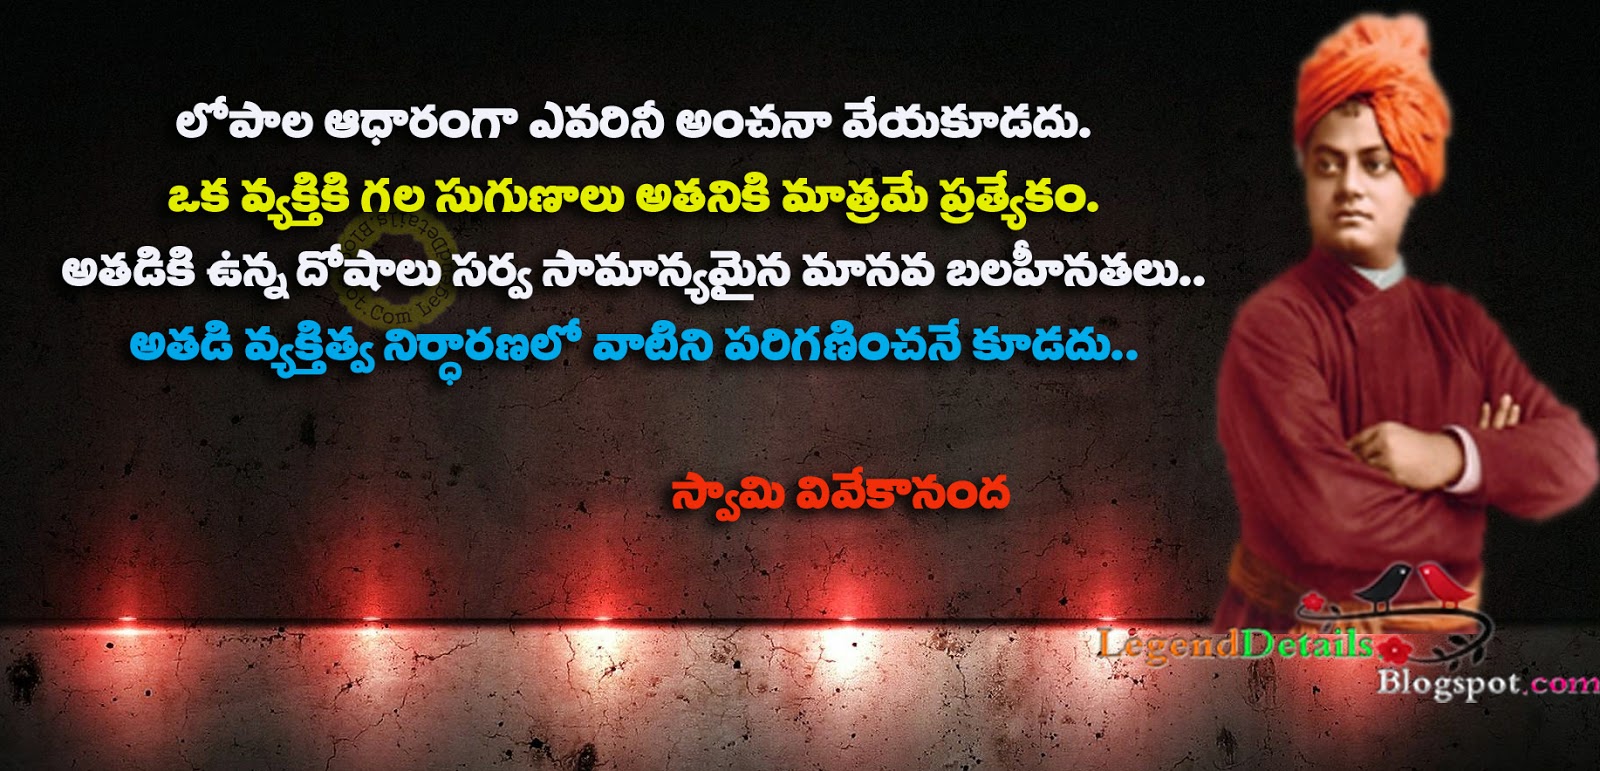 All Time Best Swamy vivekananda Quotes HD wallpapers in Telugu